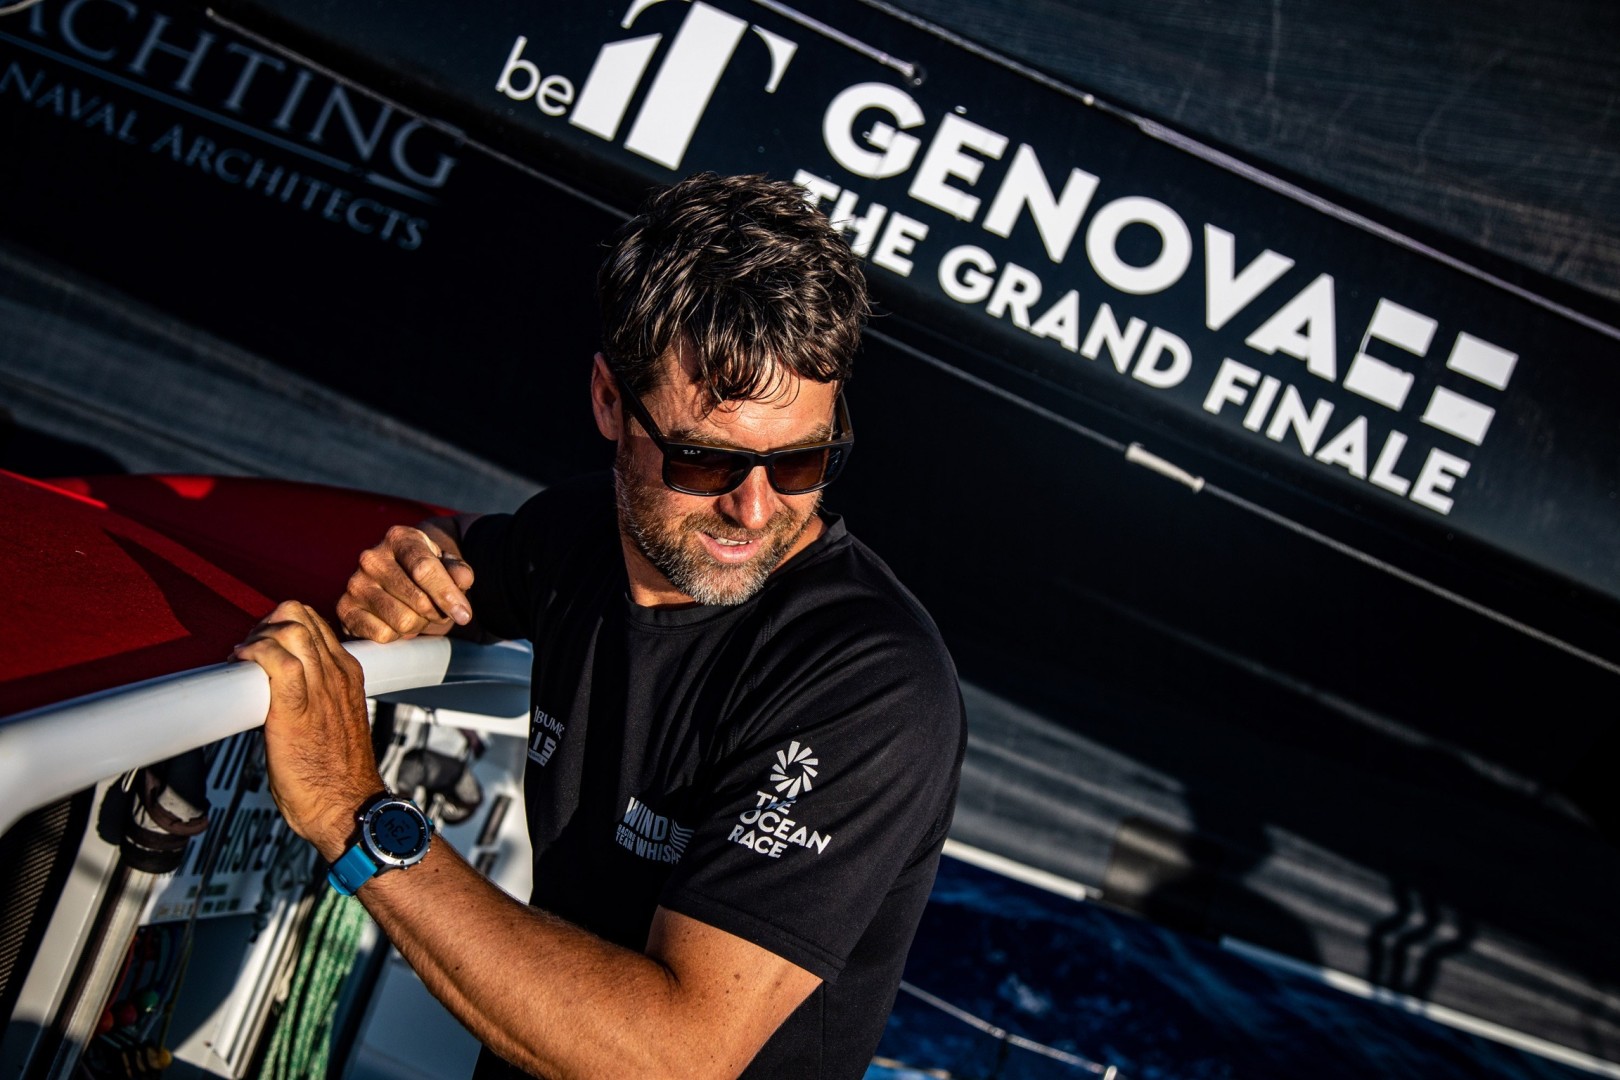 Stage 3 Day 9 onboard WindWhisper Racing Team.
© Tomasz Piotrowski / WindWhisper Racing Team / The Ocean Race